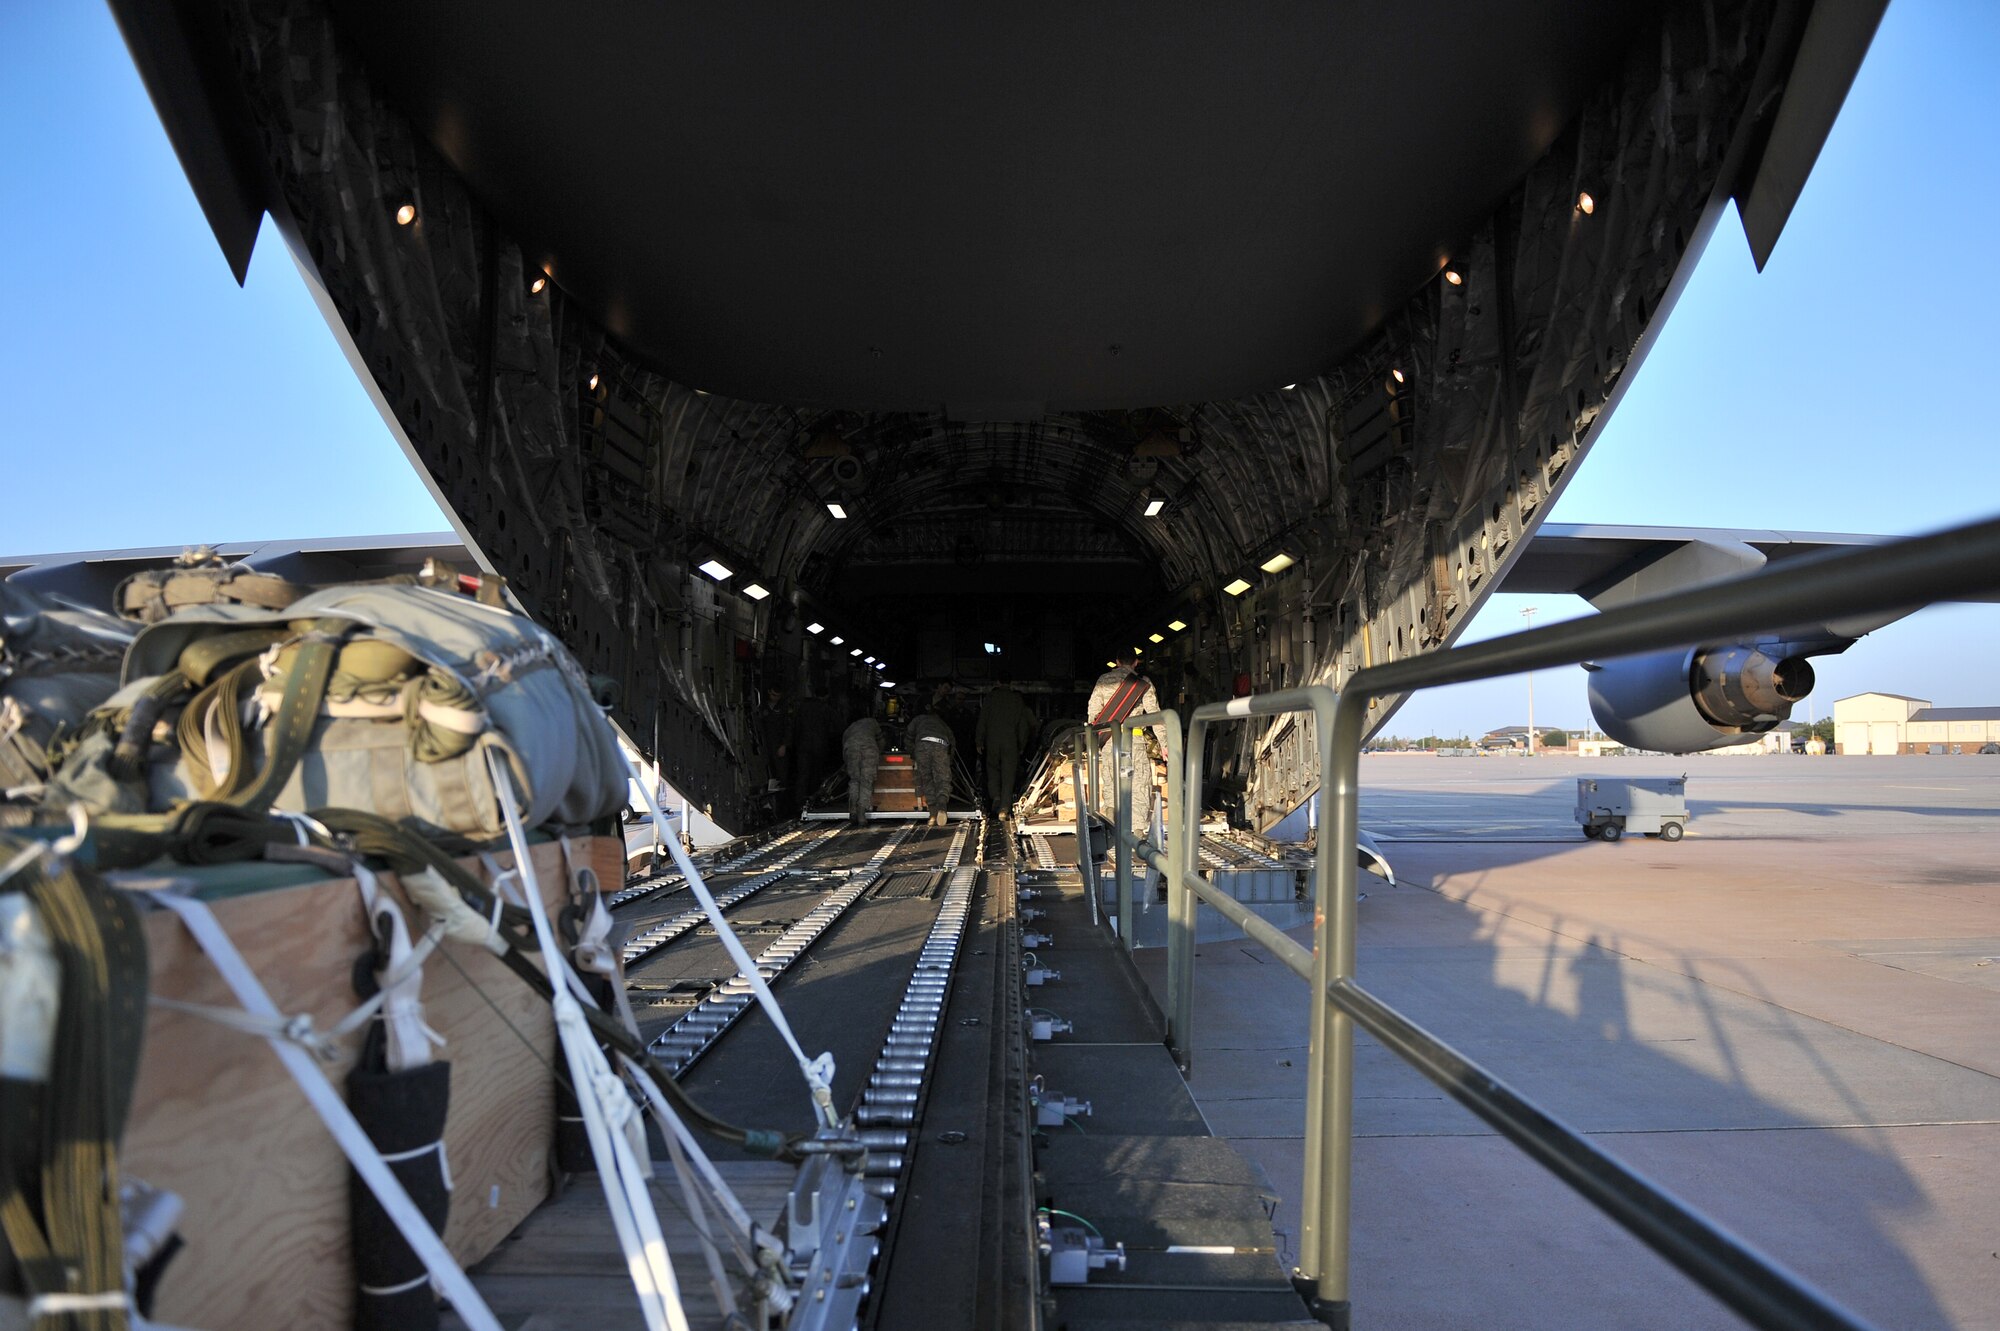 ALTUS AIR FORCE BASE, Okla. – Airmen from the 97th Logistics Readiness Squadron and 58th Airlift Squadron load a cargo pallet onto a U.S. Air Force C-17 Globemaster III cargo aircraft before an airdrop training mission Oct. 30, 2014. The 97th LRS and the 58th AS work together to ensure that future loadmasters have the training they need to perform airdrop missions during real-world contingency and humanitarian operations. (U.S. Air Force Photo by Senior Airman Dillon Davis/Released)